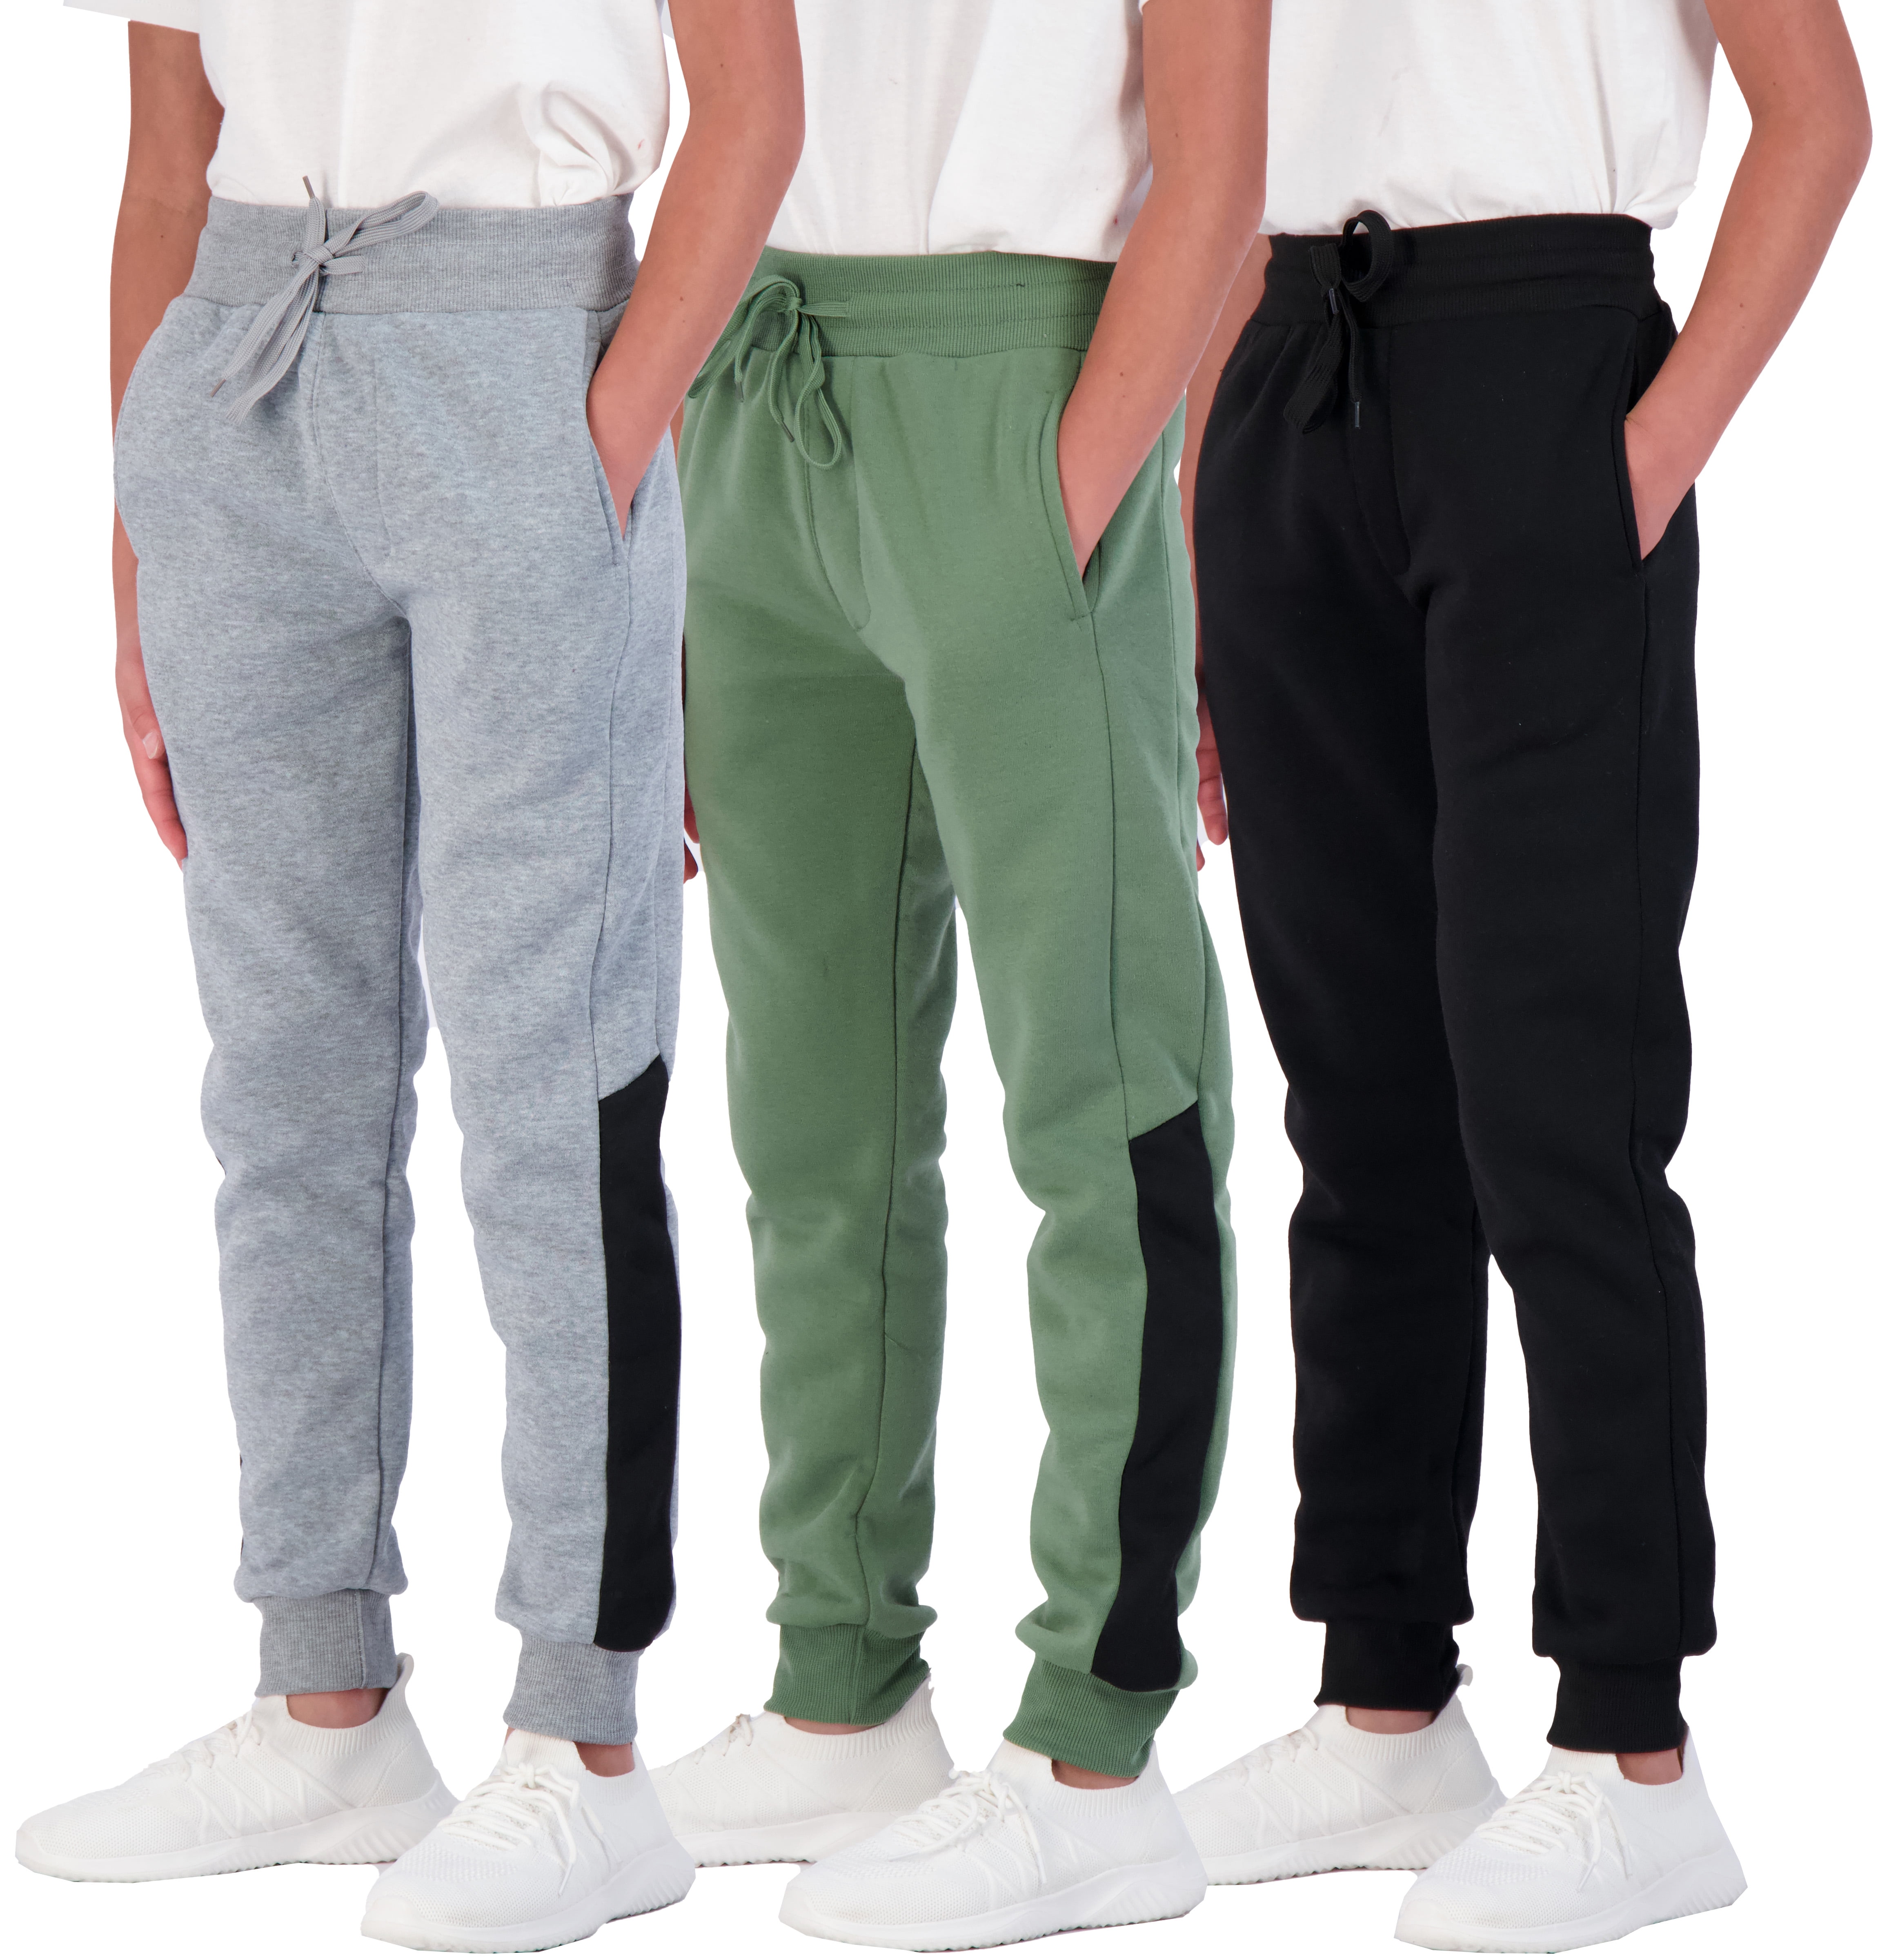 3 Pack: Boys Youth Active Athletic Soft Fleece Jogger Sweatpants 